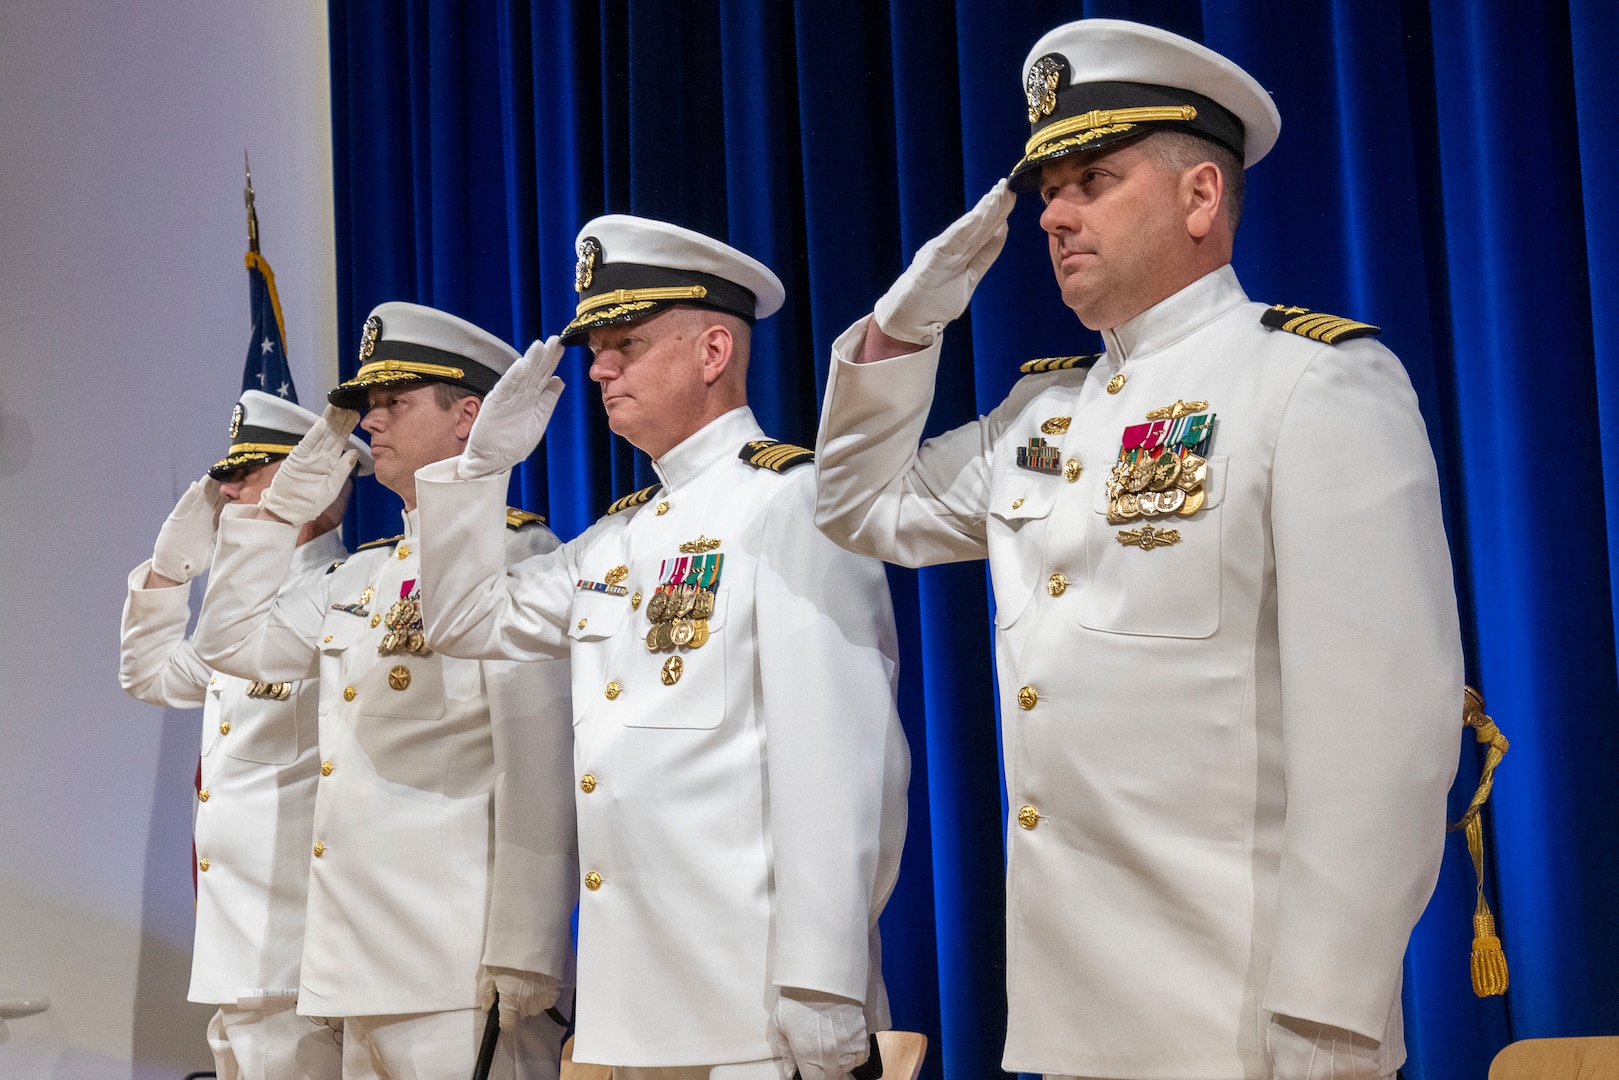 The official party, consisting of Capt. Aaron Stroud, Rear Adm. Kevin Byrne, Capt. Todd E. Hutchison and Capt. Matthew Tardy salute as the flag is presented during a change-of-command ceremony held in West Bethesda, Md., on May 12. (U.S. Navy photo by Devin Pisner)